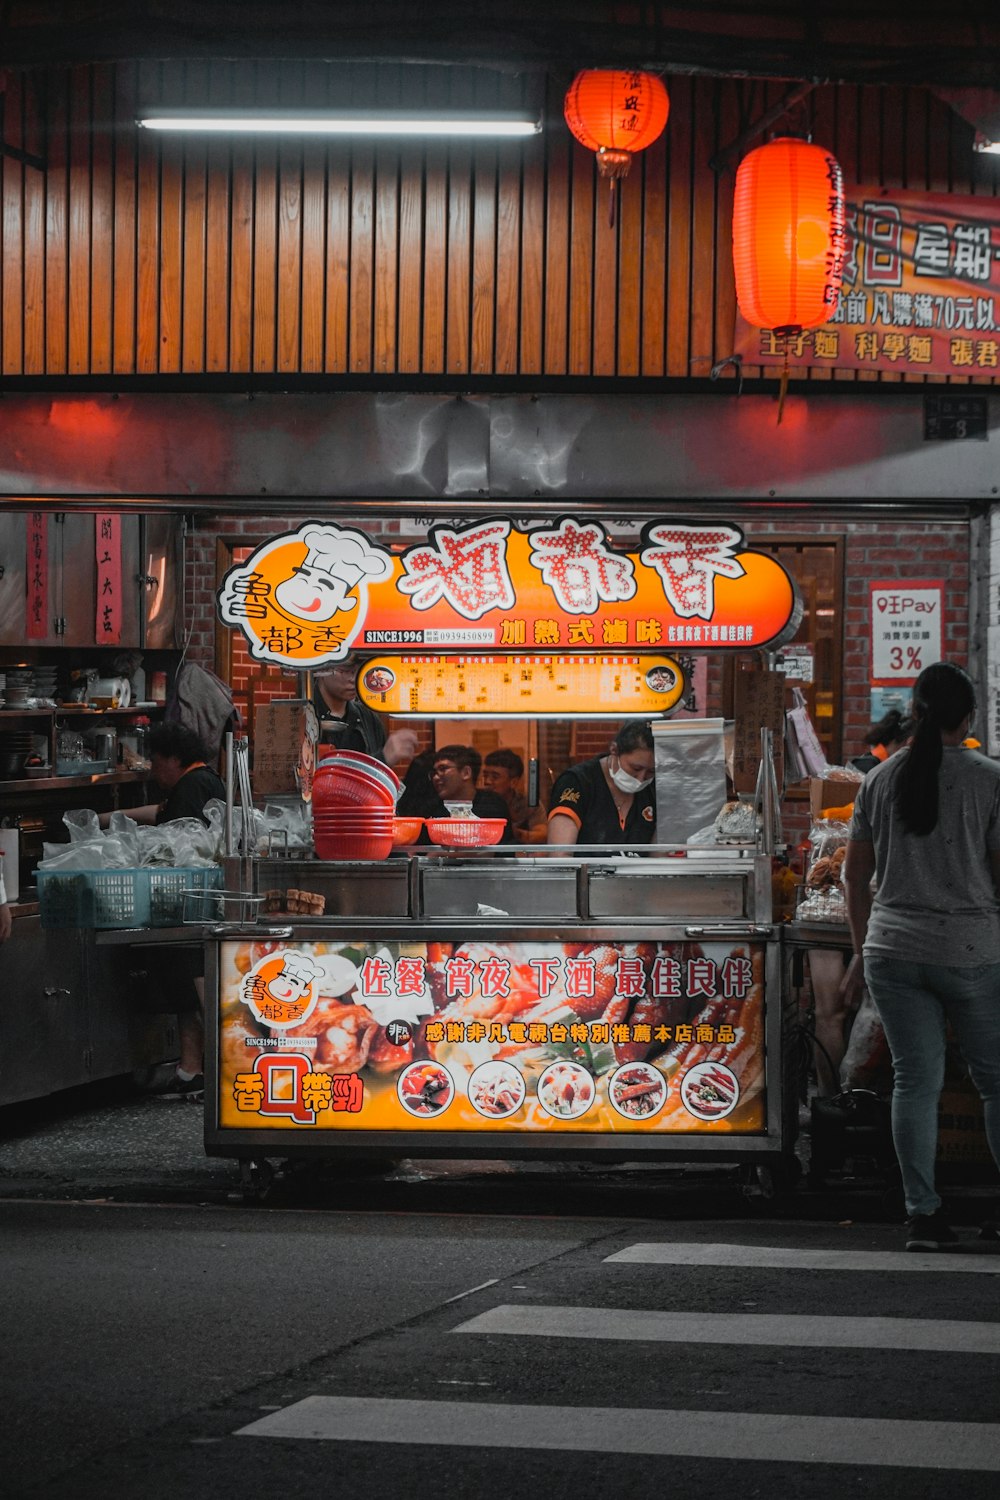 man in black jacket standing in front of food stall